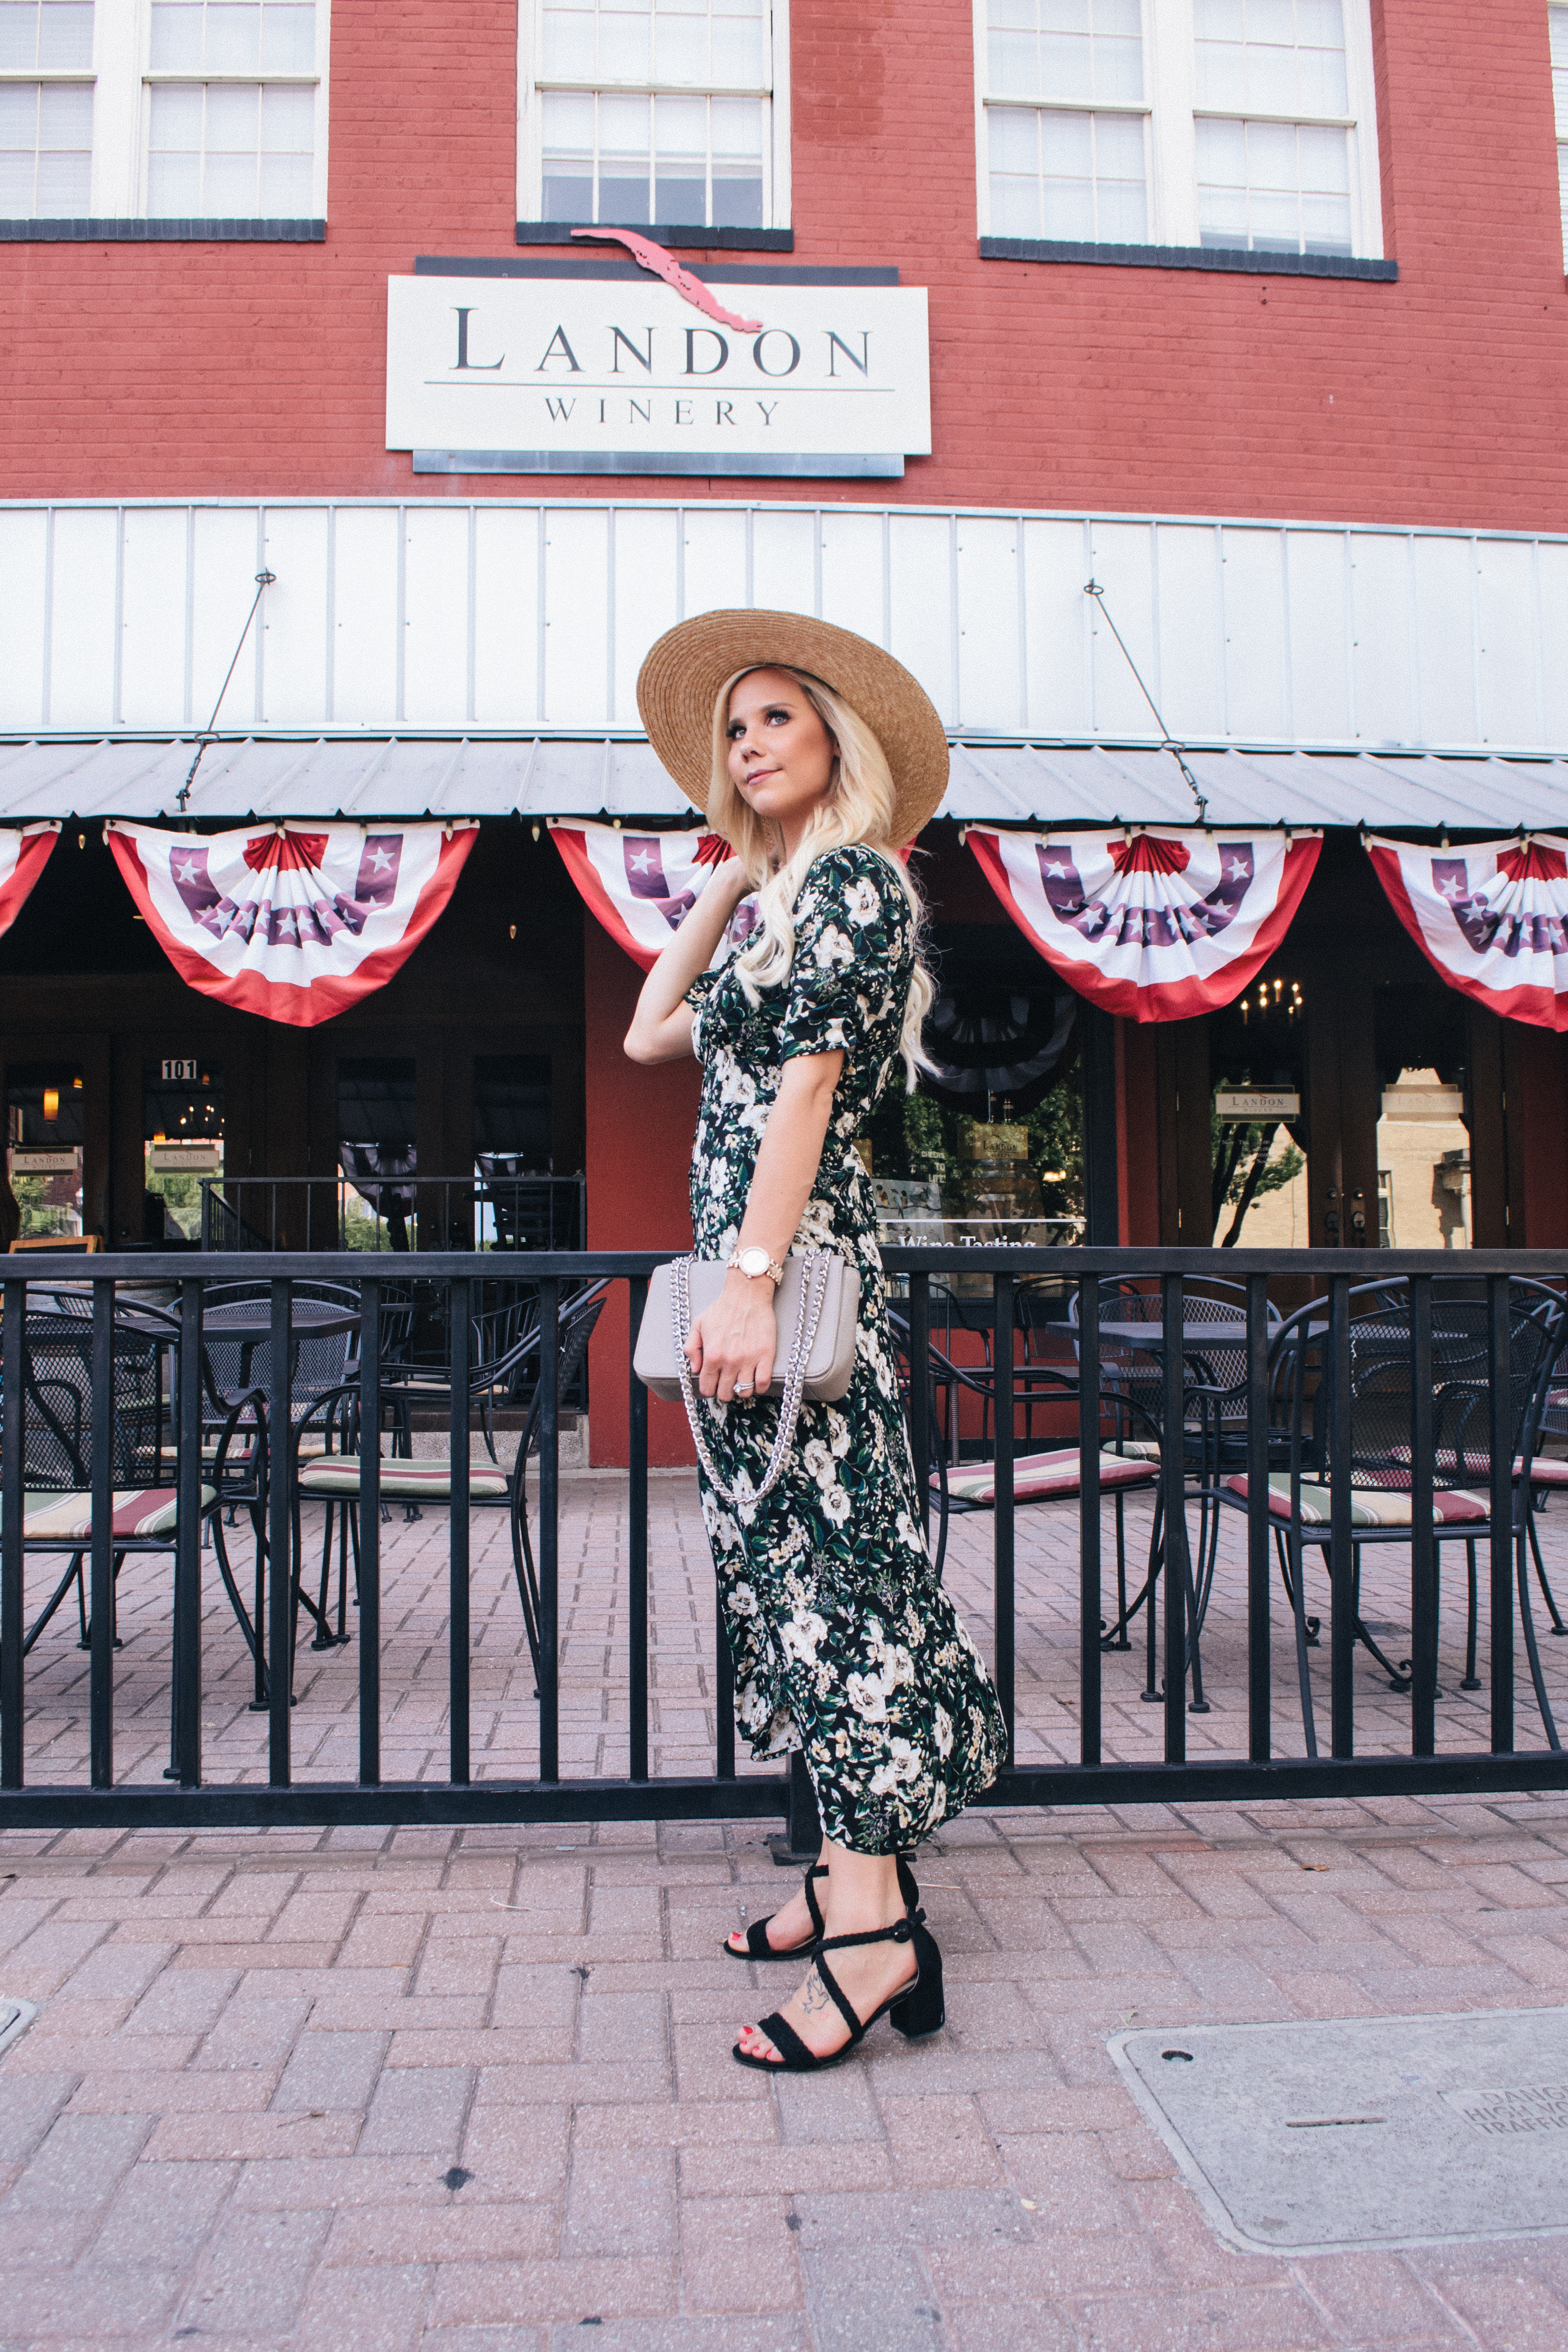 Learn how to transition your wardrobe to fall with this tips. Dark florals are a key print to take you from summer to fall without changing your entire closet. 